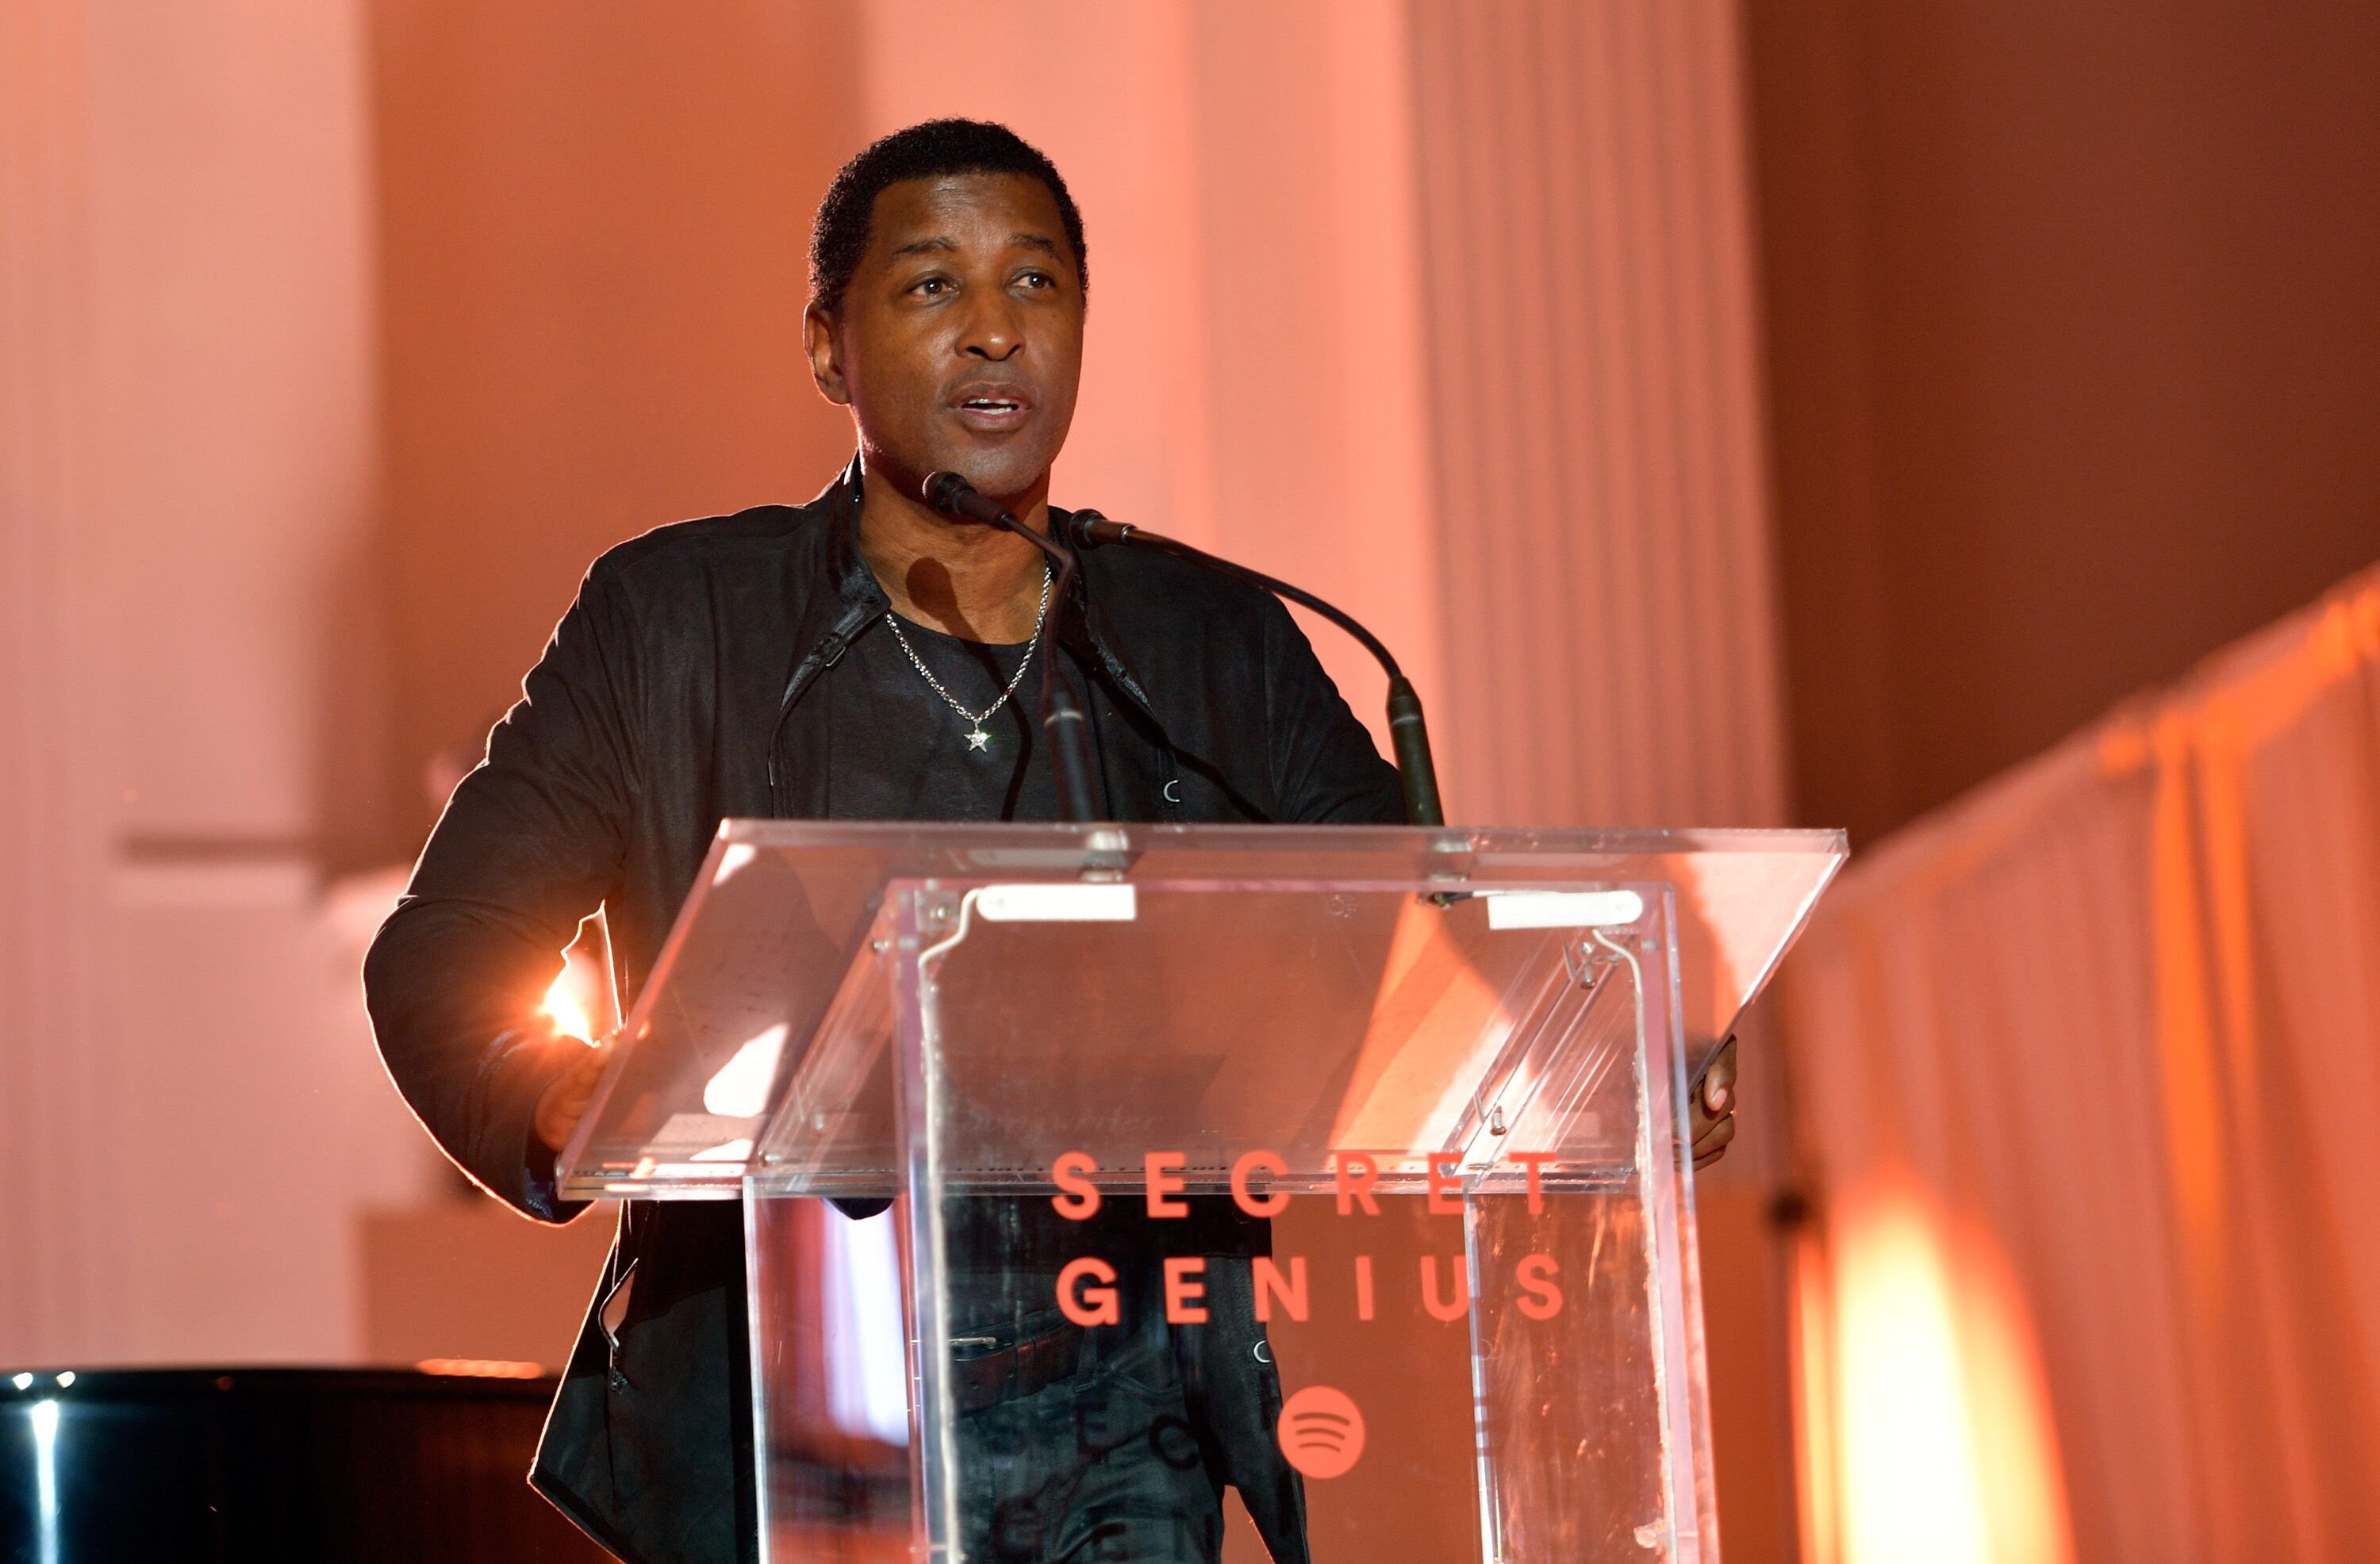  Kenneth "Babyface" Edmonds speaks onstage during Spotify's Inaugural Secret Genius Awards hosted by Lizzo at Vibiana on November 1, 2017 in Los Angeles, California. | Source: Getty Images